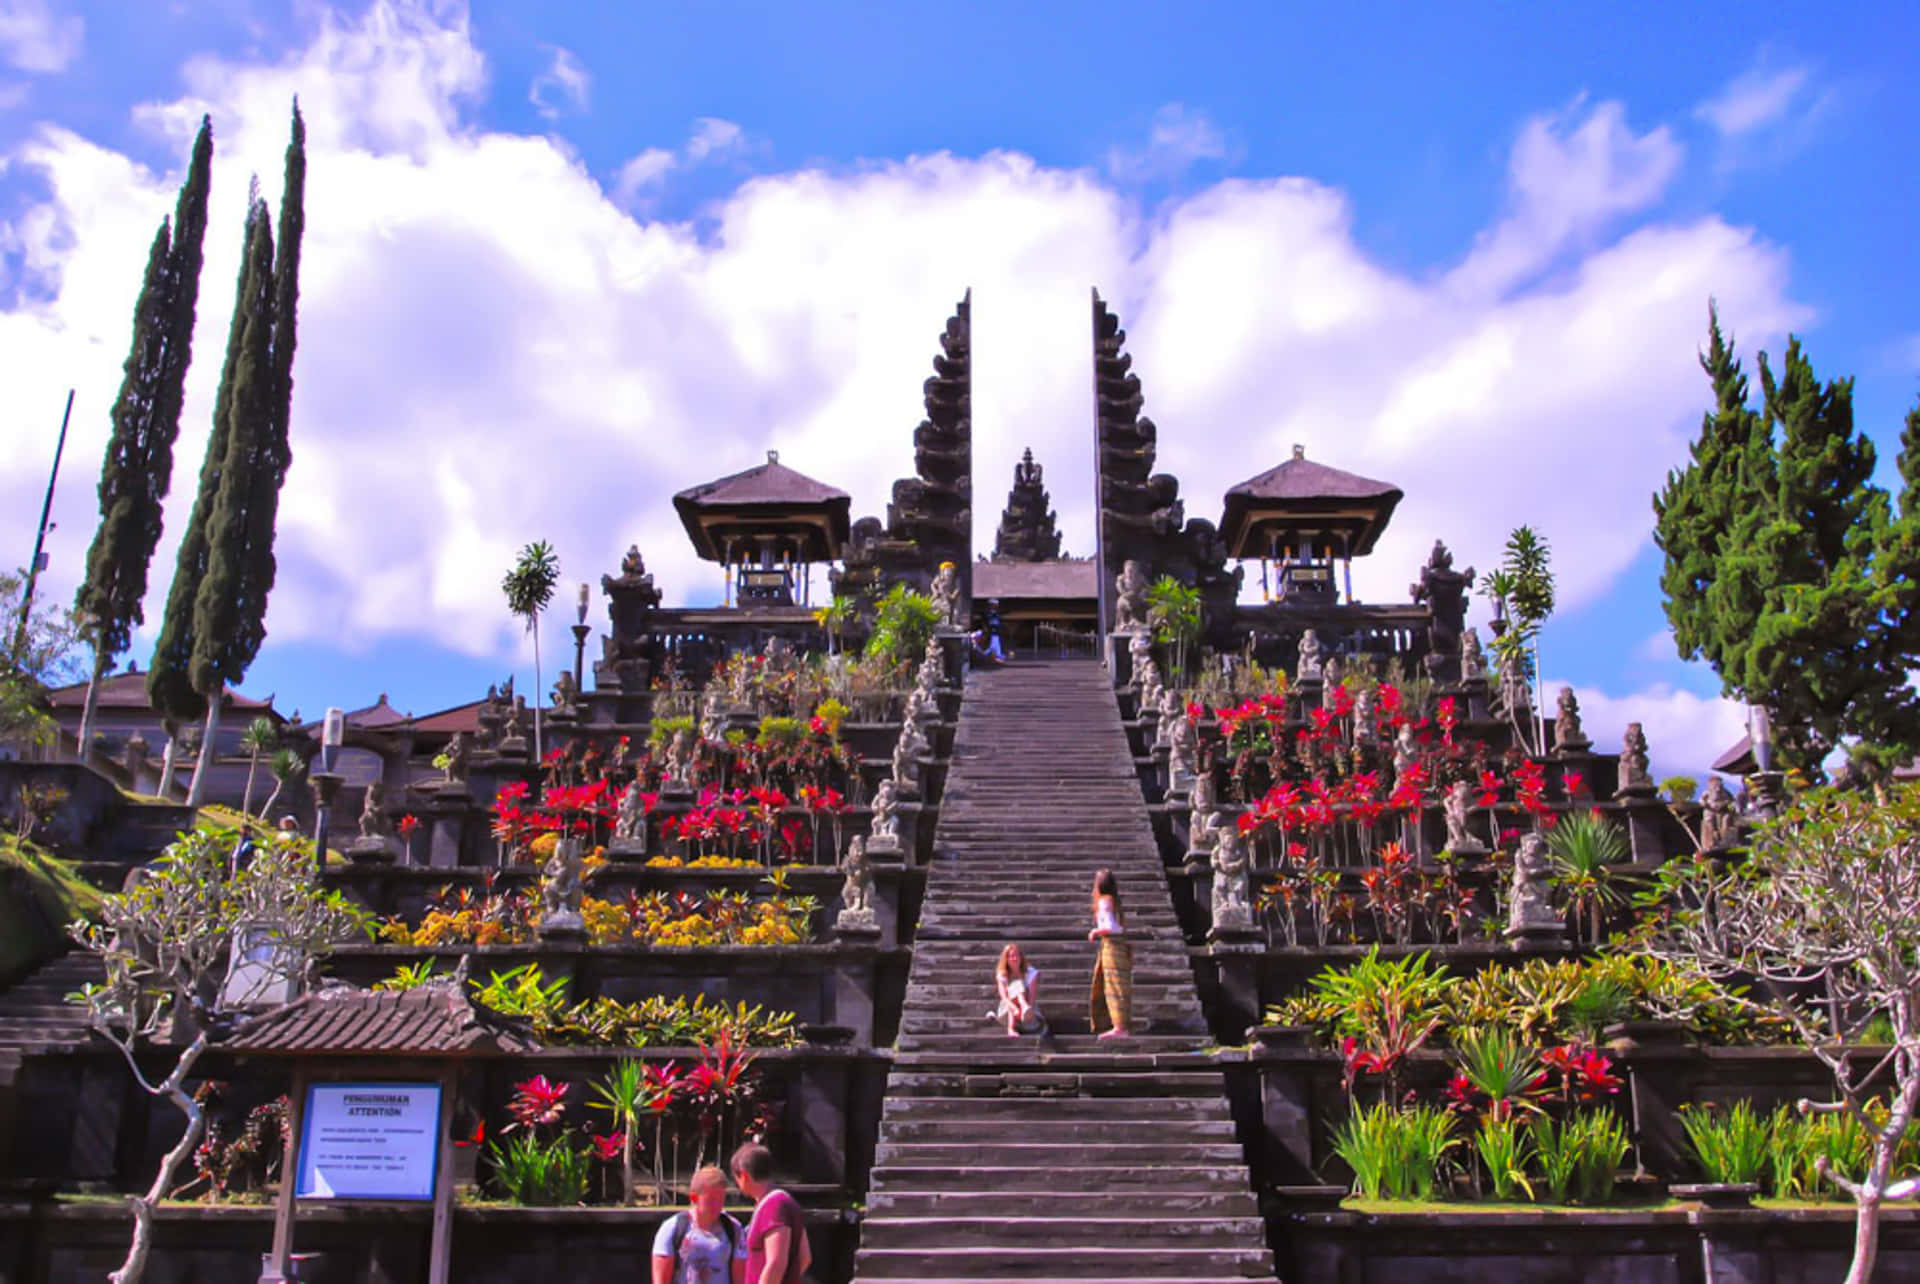 "Take in the beauty of Bali"